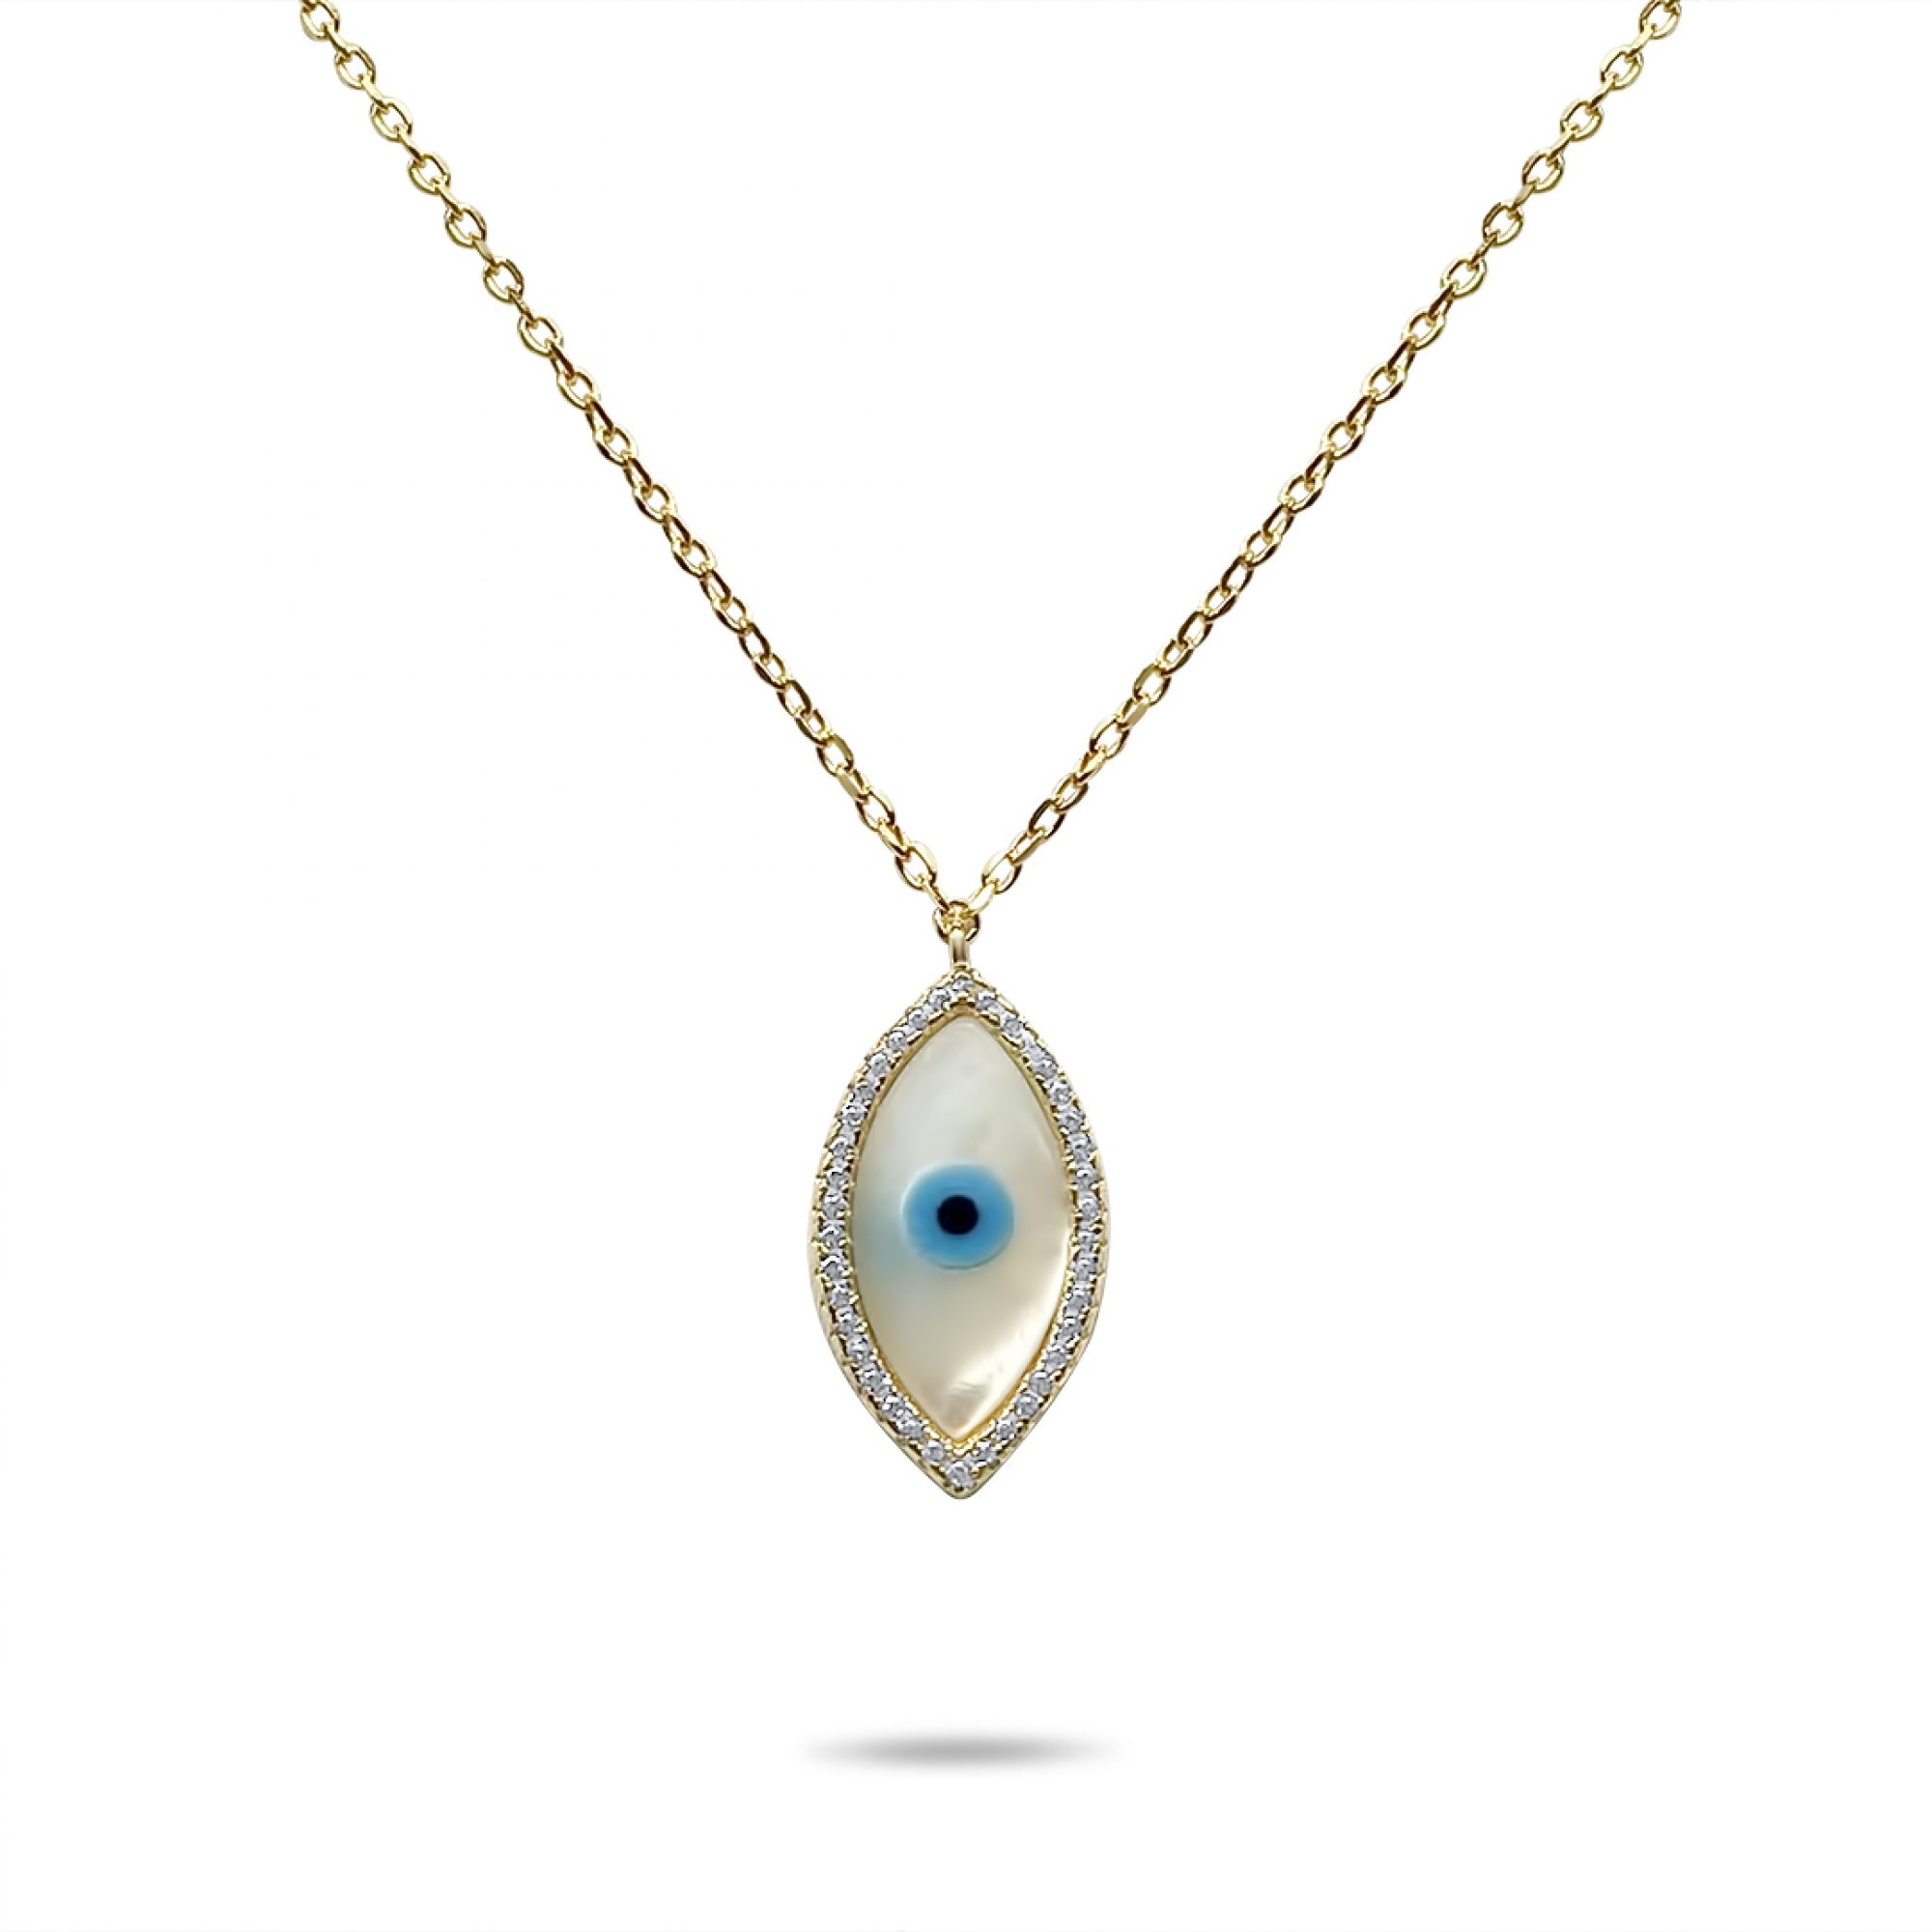 Gold plated eye necklace with zircon stones